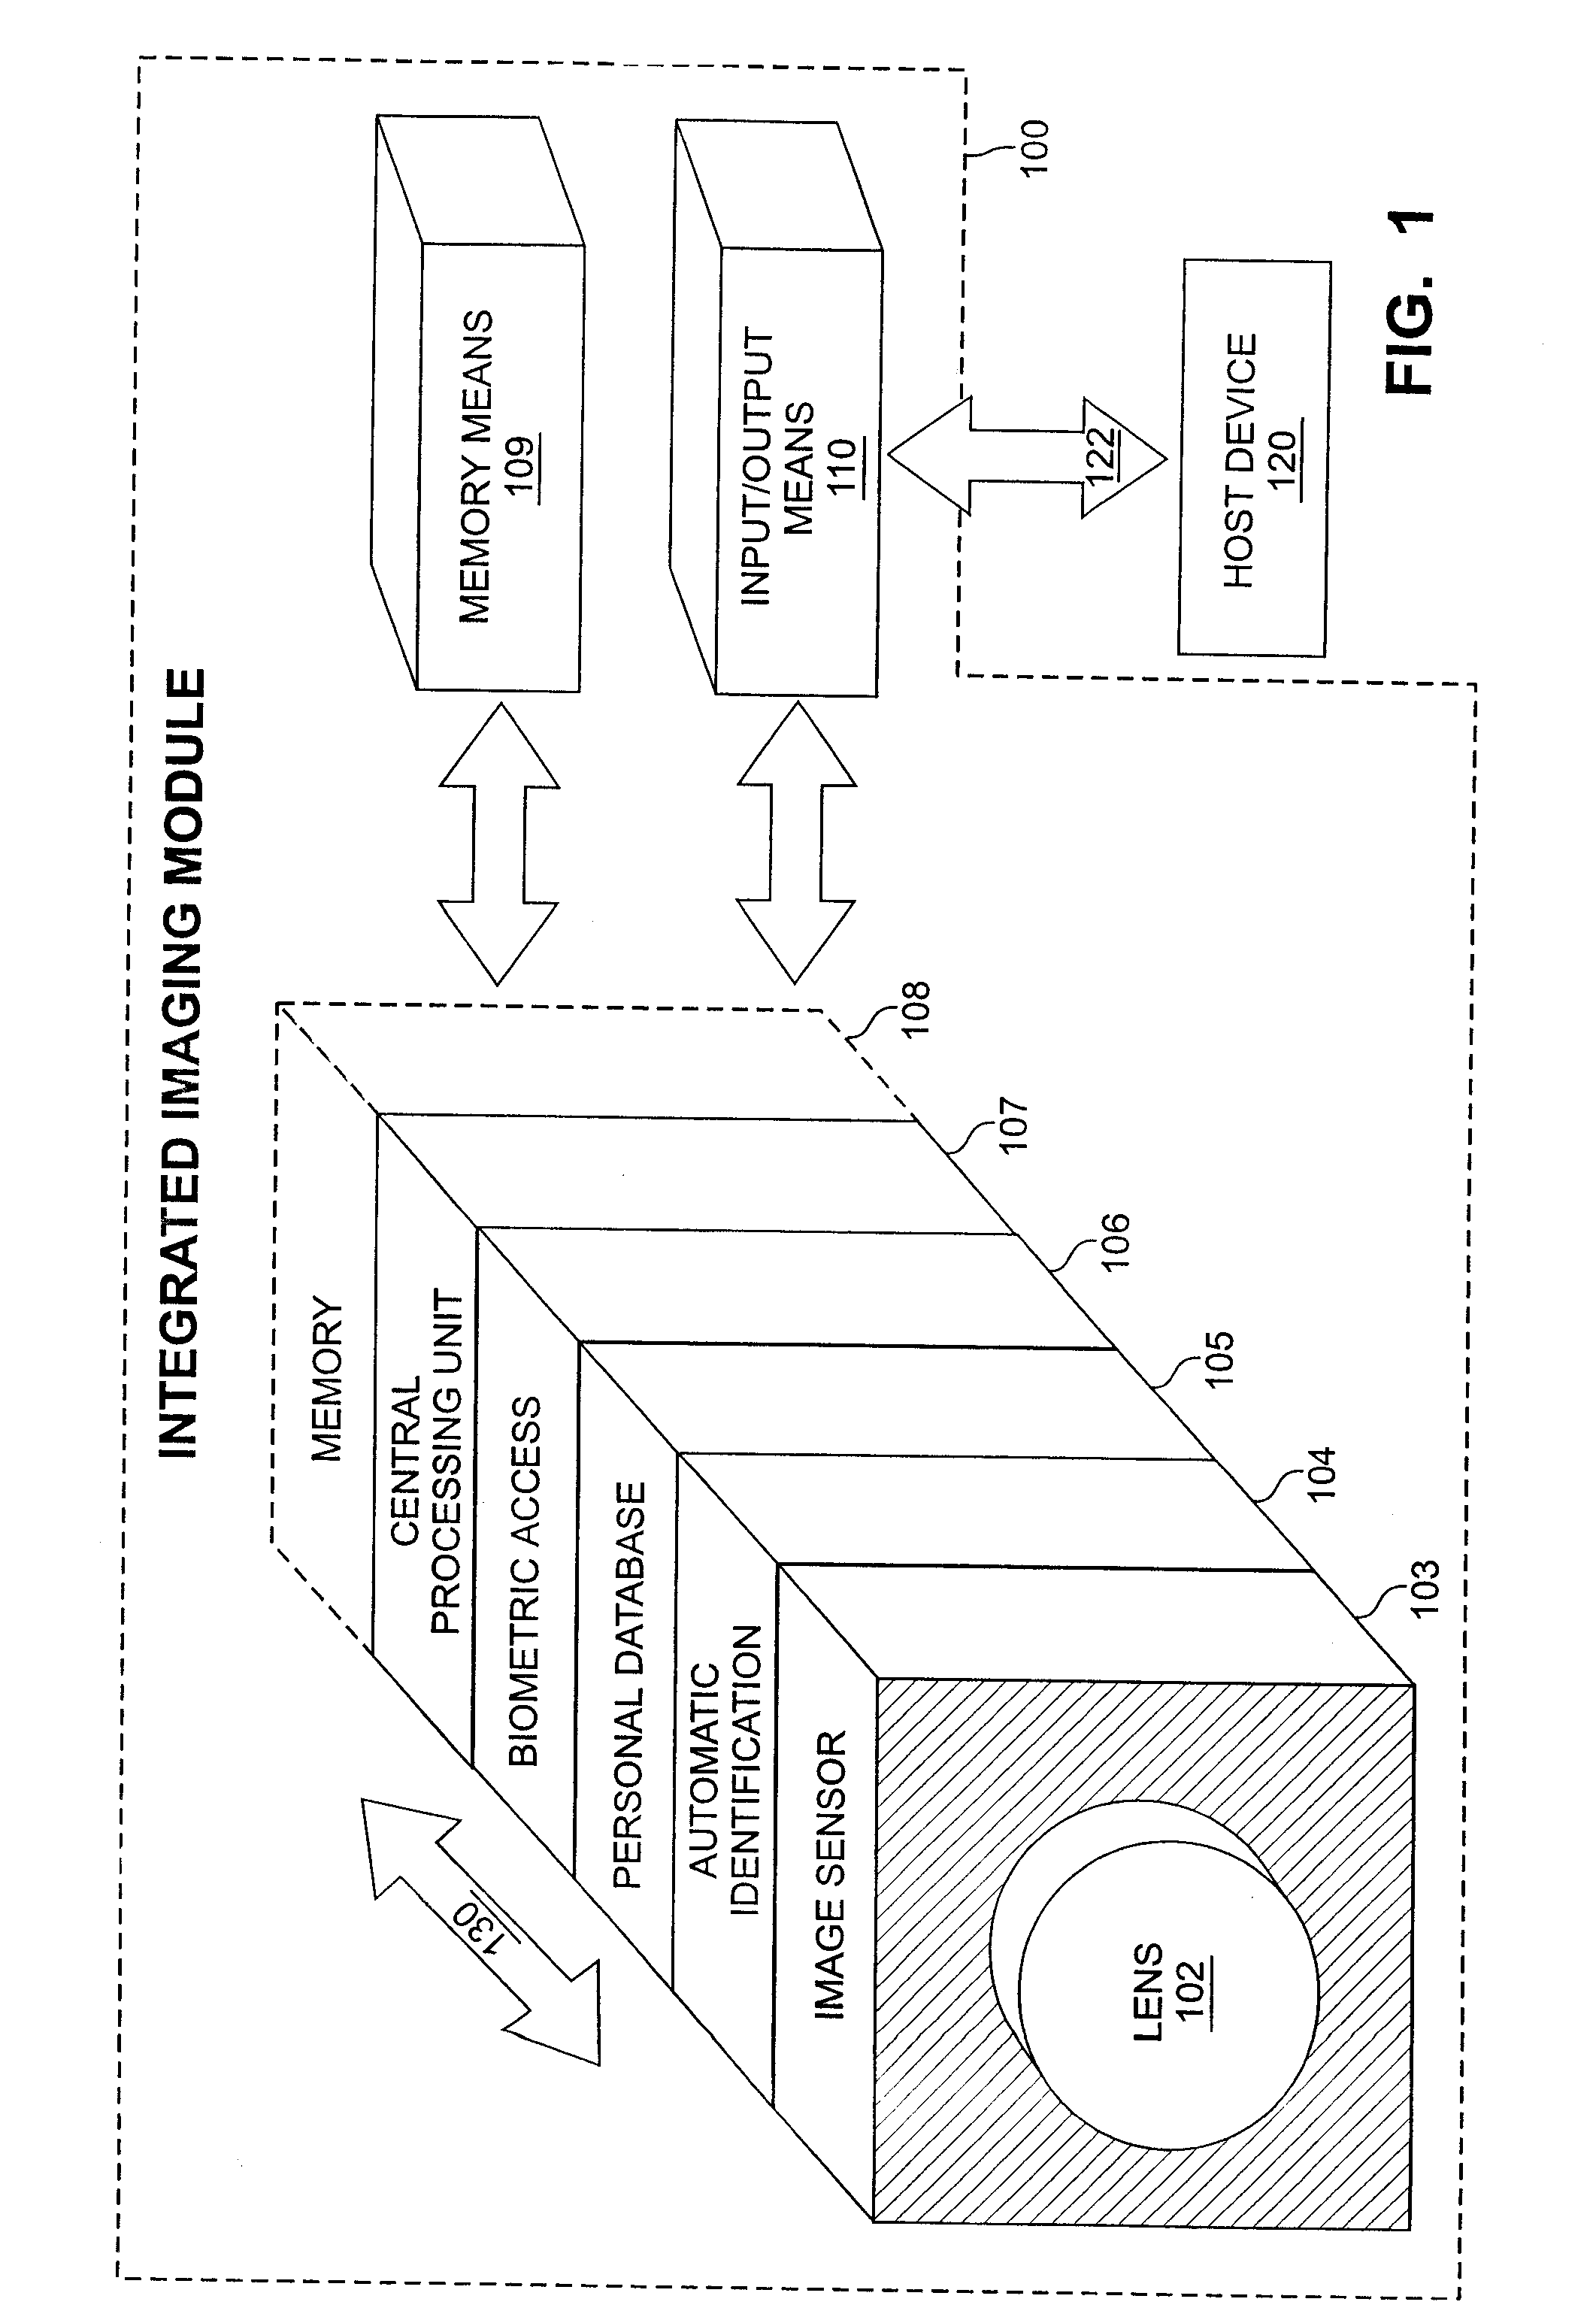 A system and architecture that supports a multi-function semiconductor device between networks and portable wireless communications products